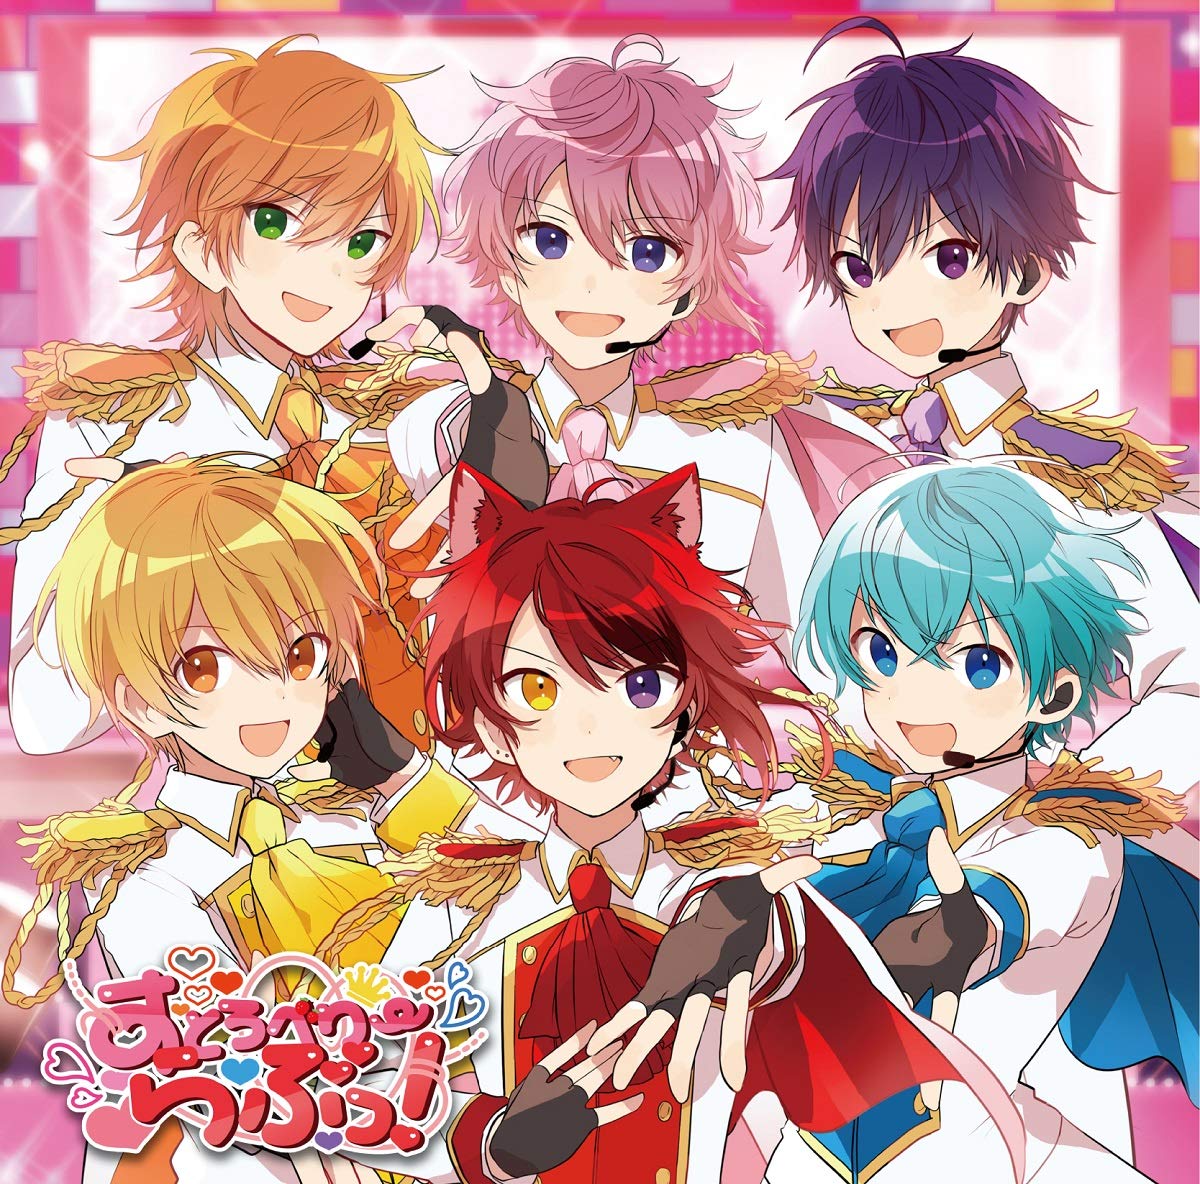 Cover for『Strawberry Prince - Anniversary』from the release『Strawberry Love!』